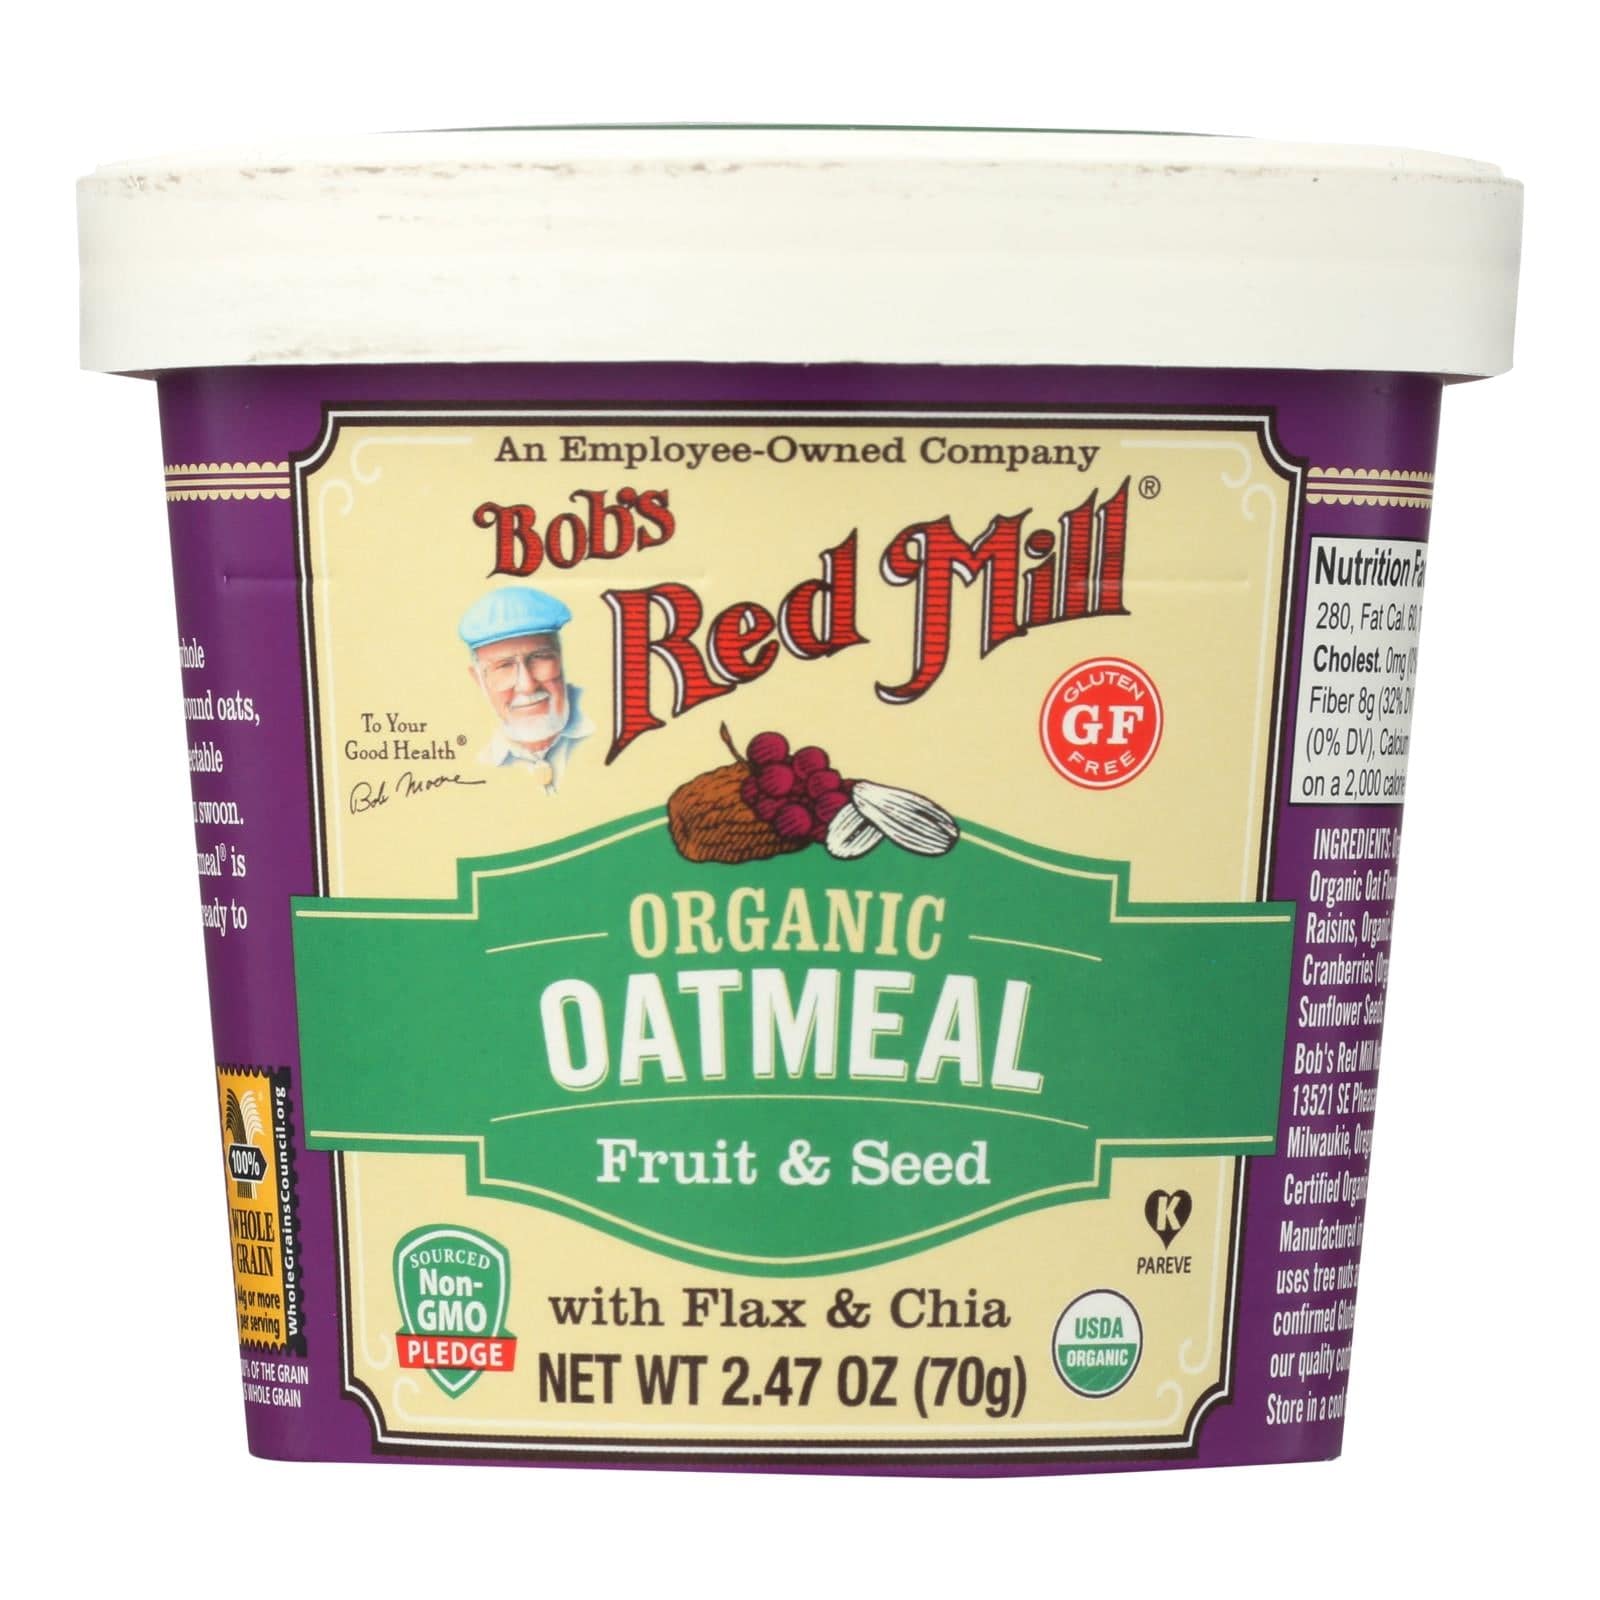 Bob's Red Mill - Oatmeal Cup - Organic Fruit And Seed - Gluten Free - Case Of 12 - 2.47 Oz | OnlyNaturals.us